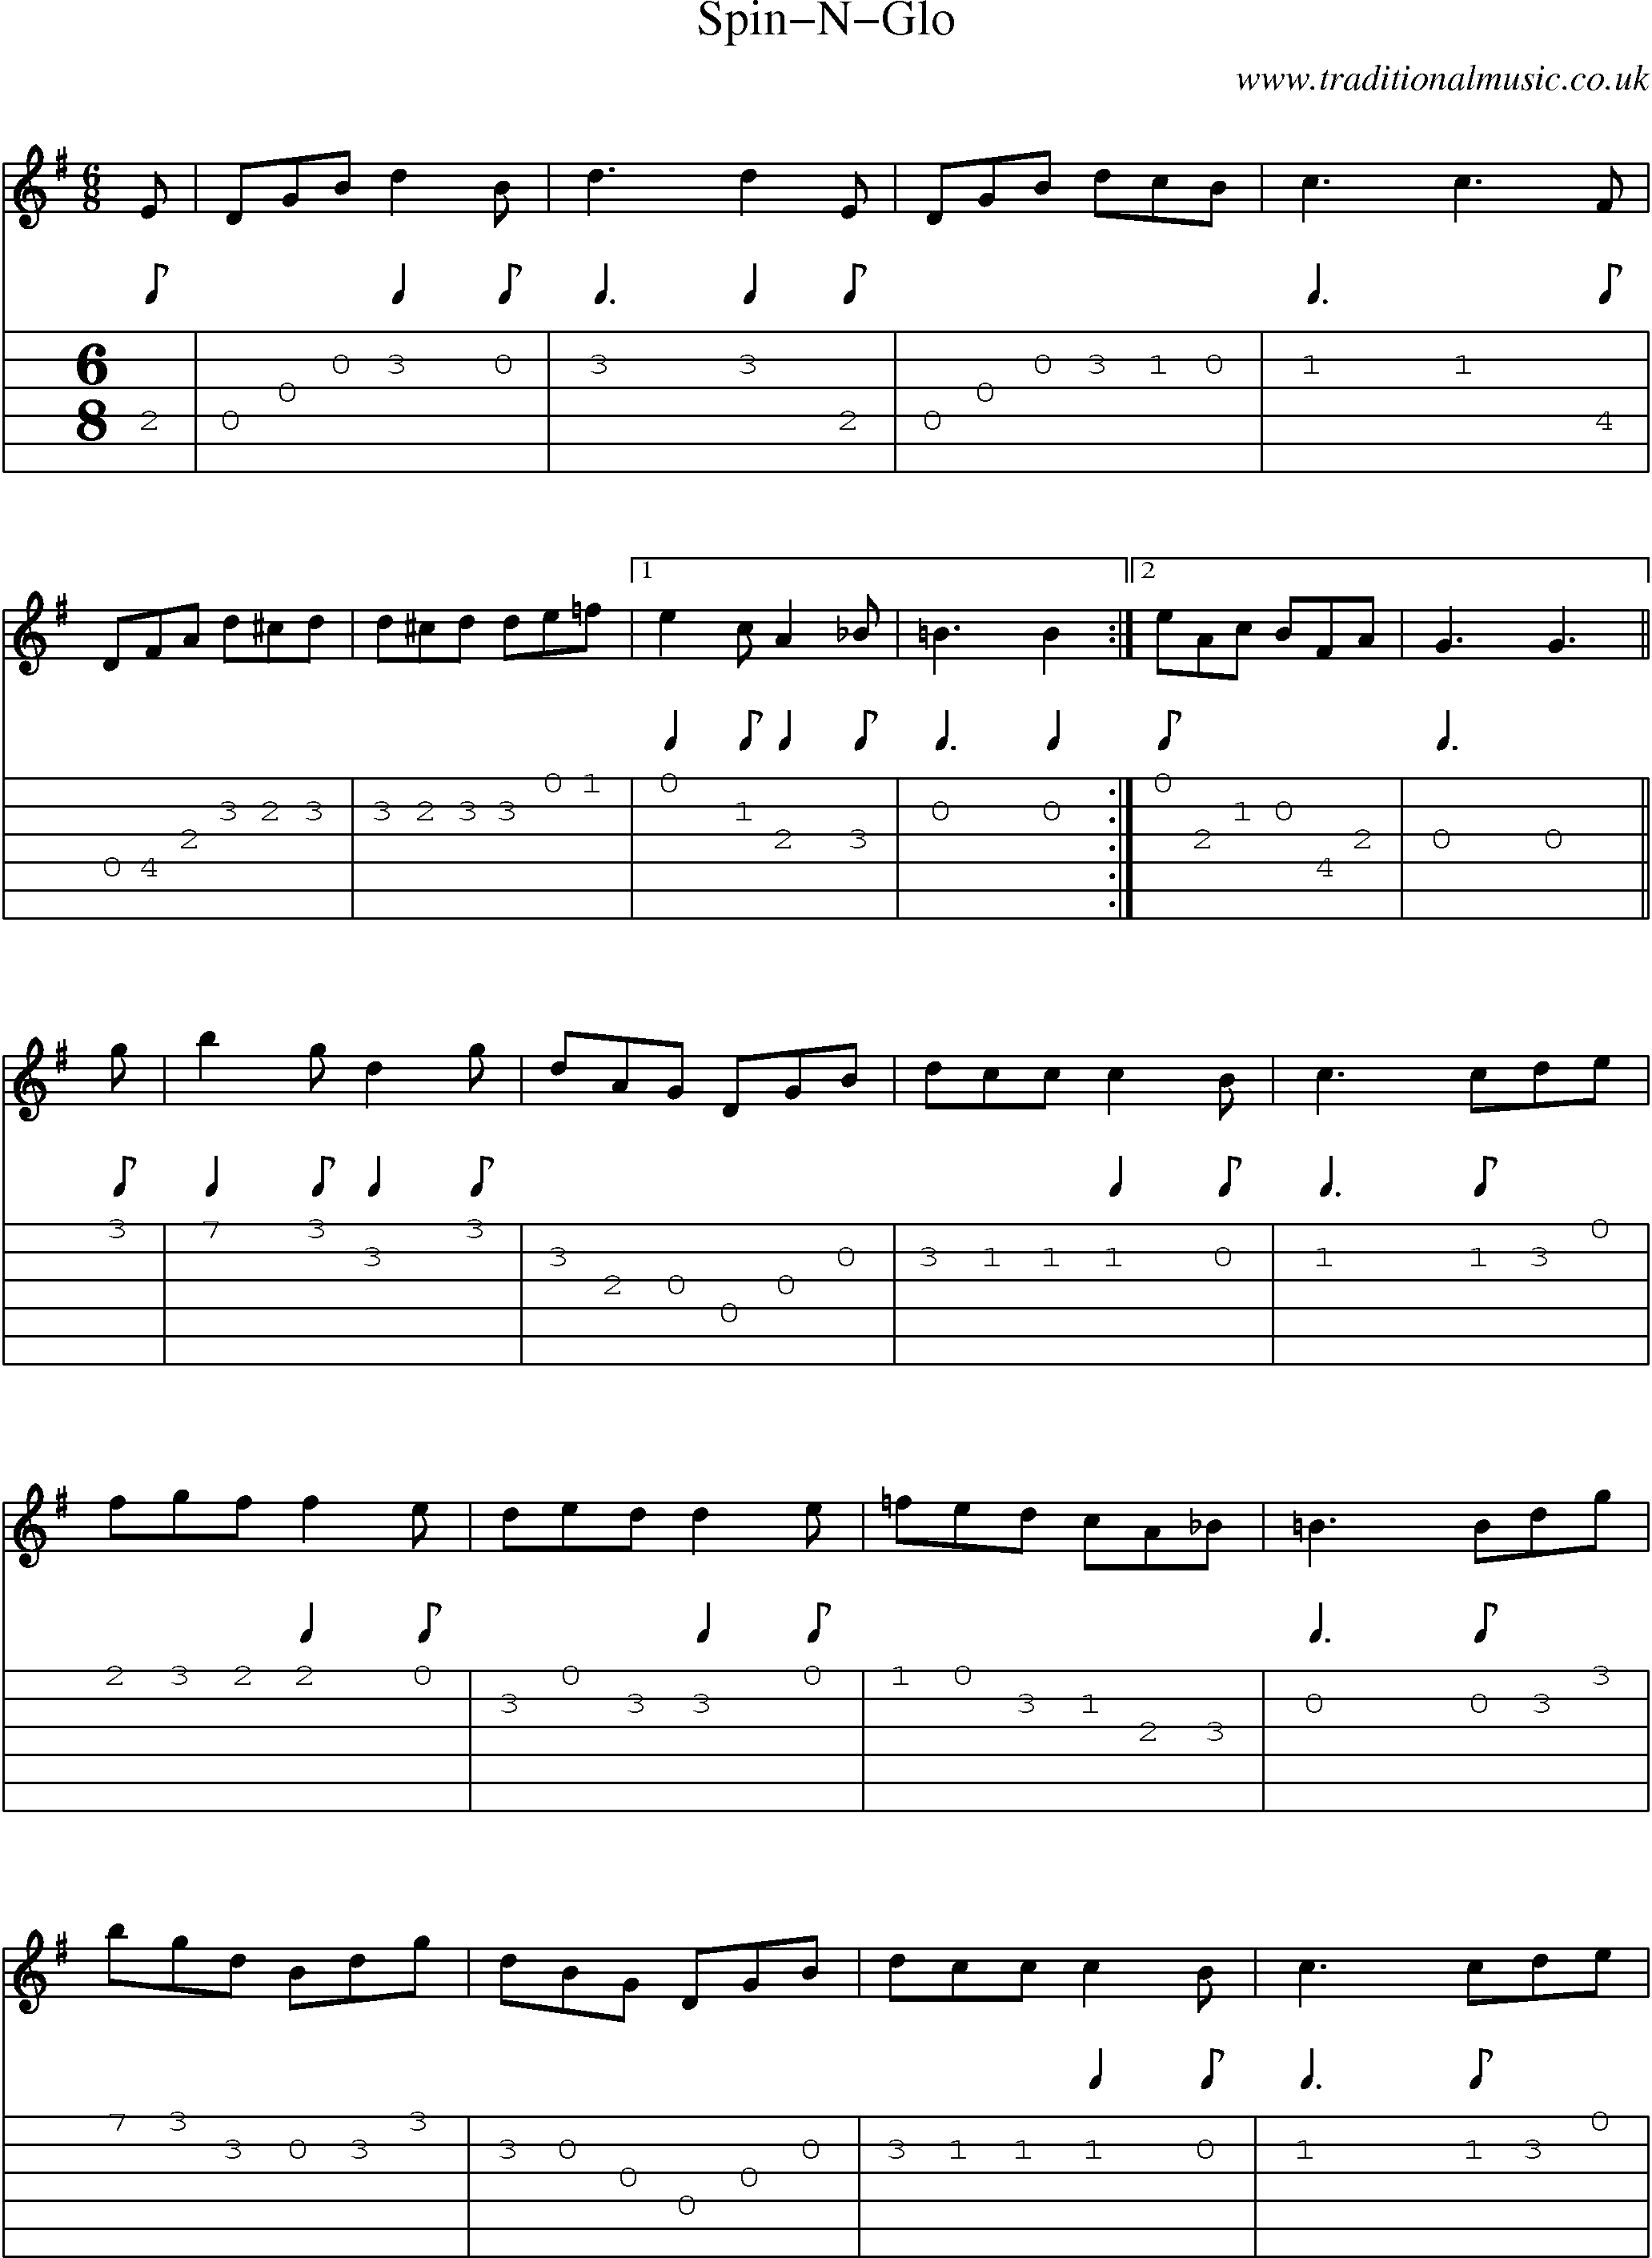 Music Score and Guitar Tabs for Spinnglo